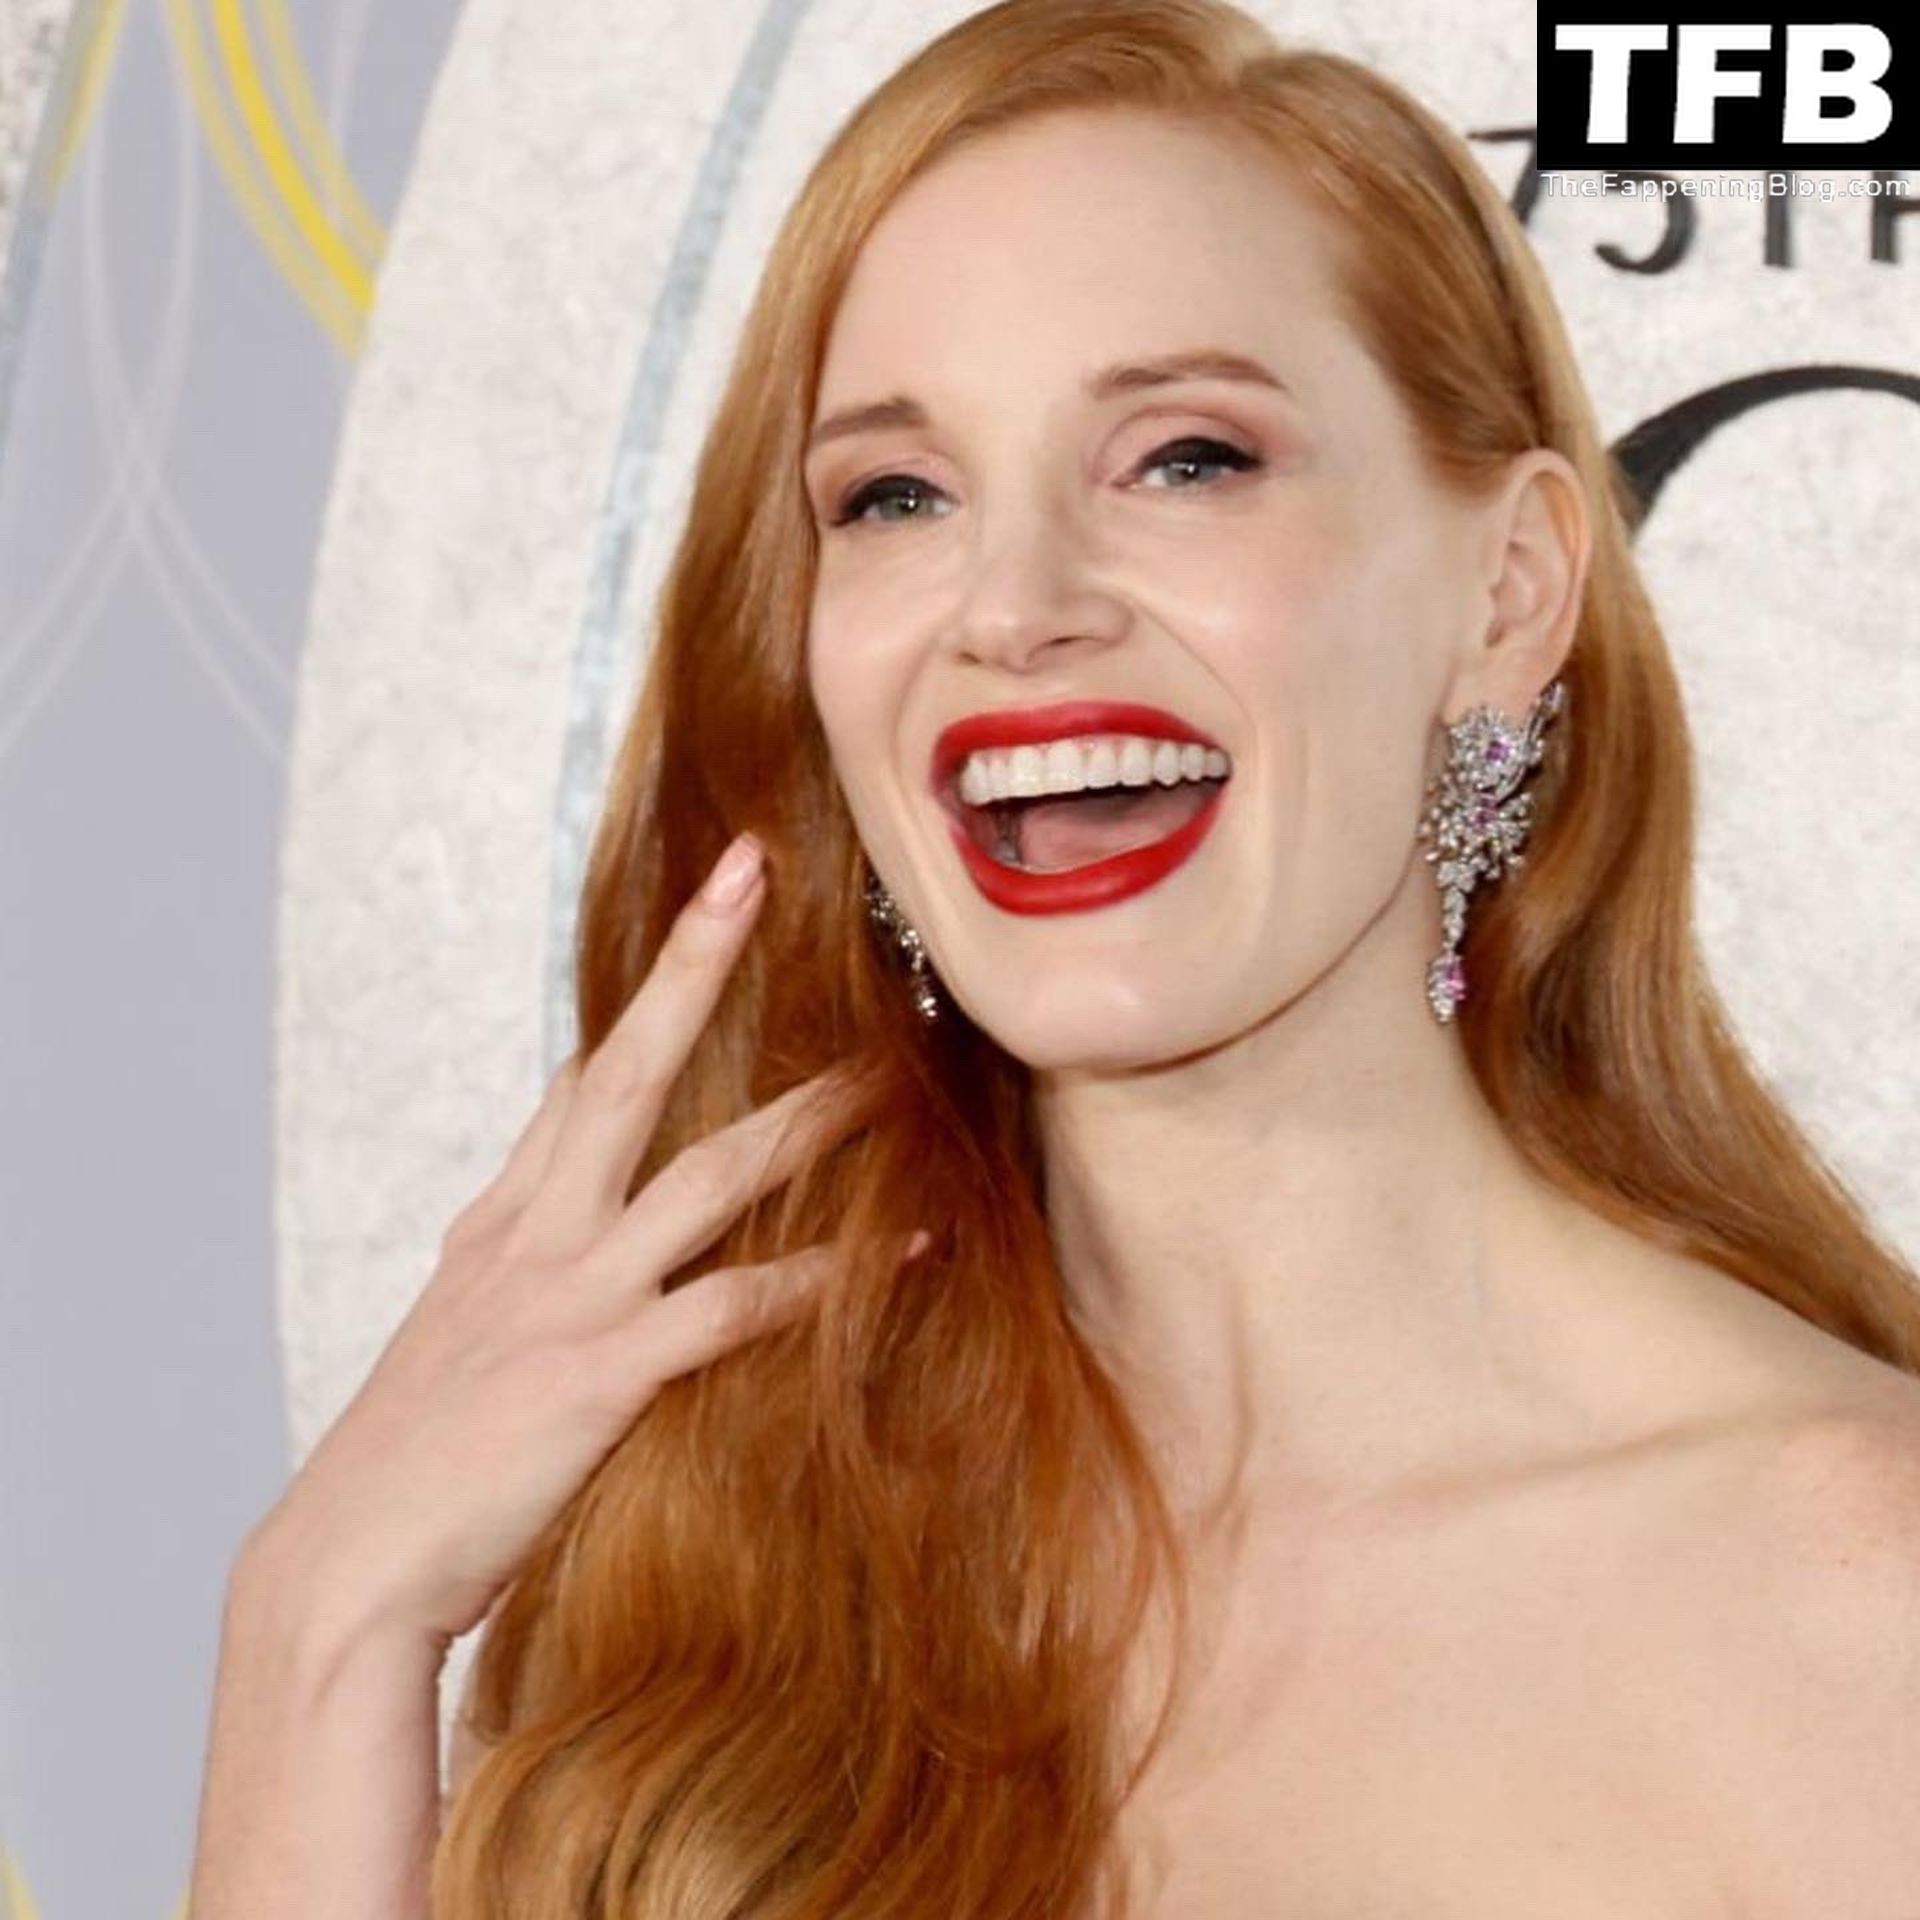 Jessica-Chastain-Sexy-The-Fappening-Blog-6.jpg